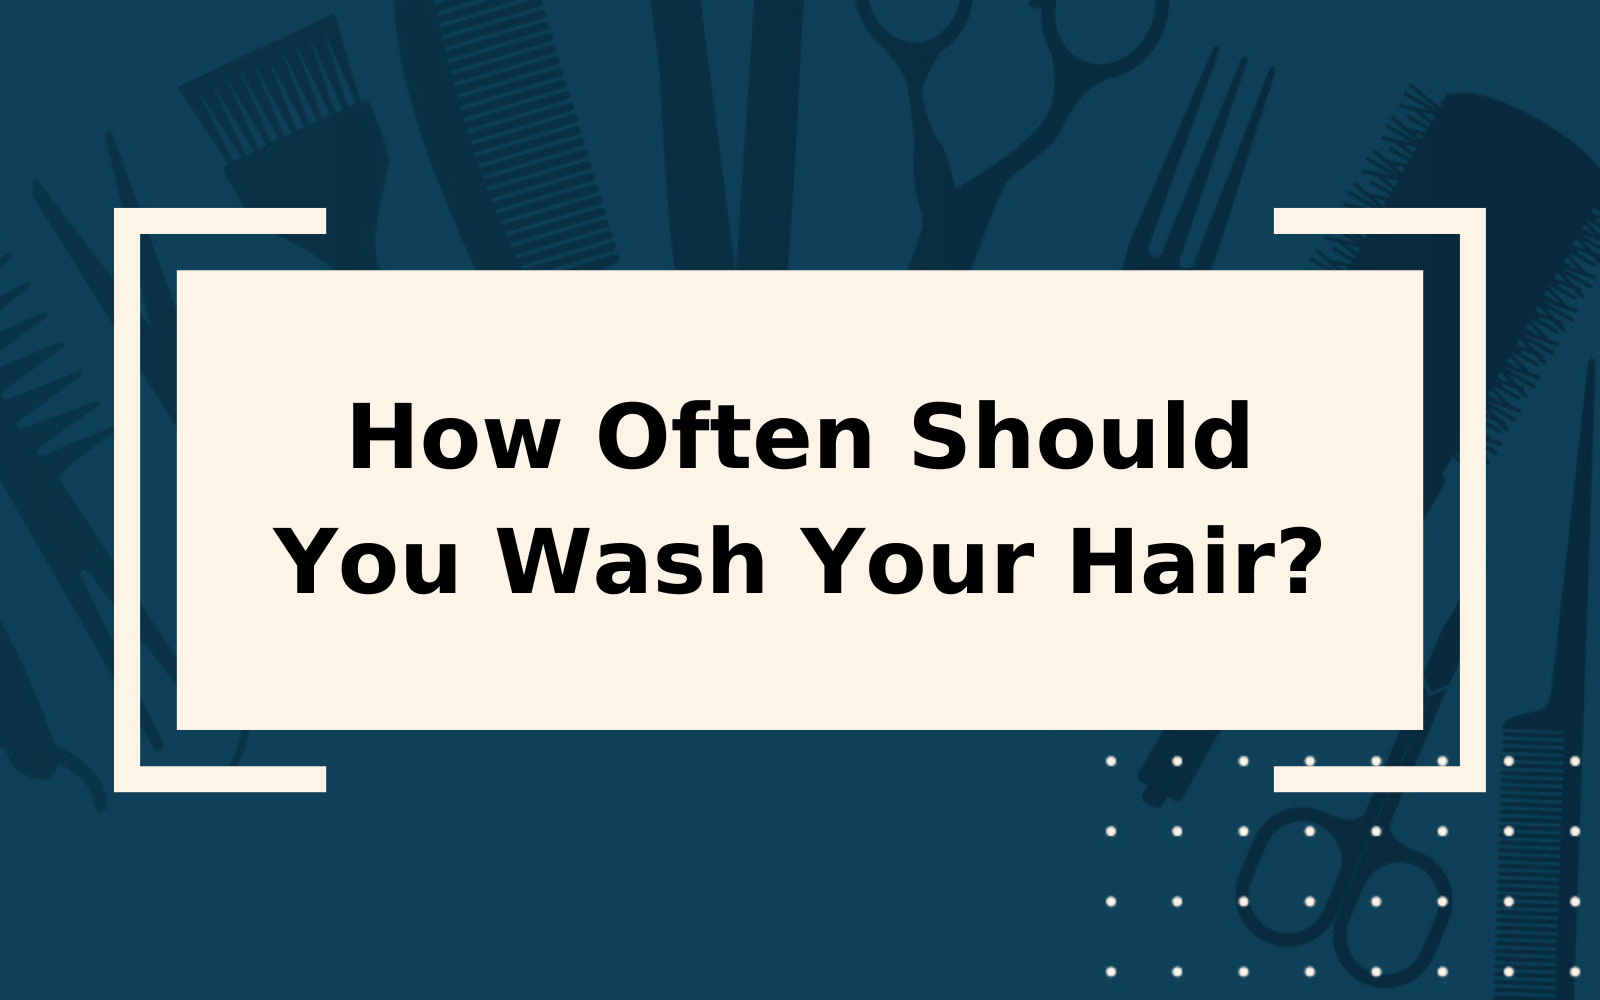 How Often Should You Wash Your Hair in 2022?